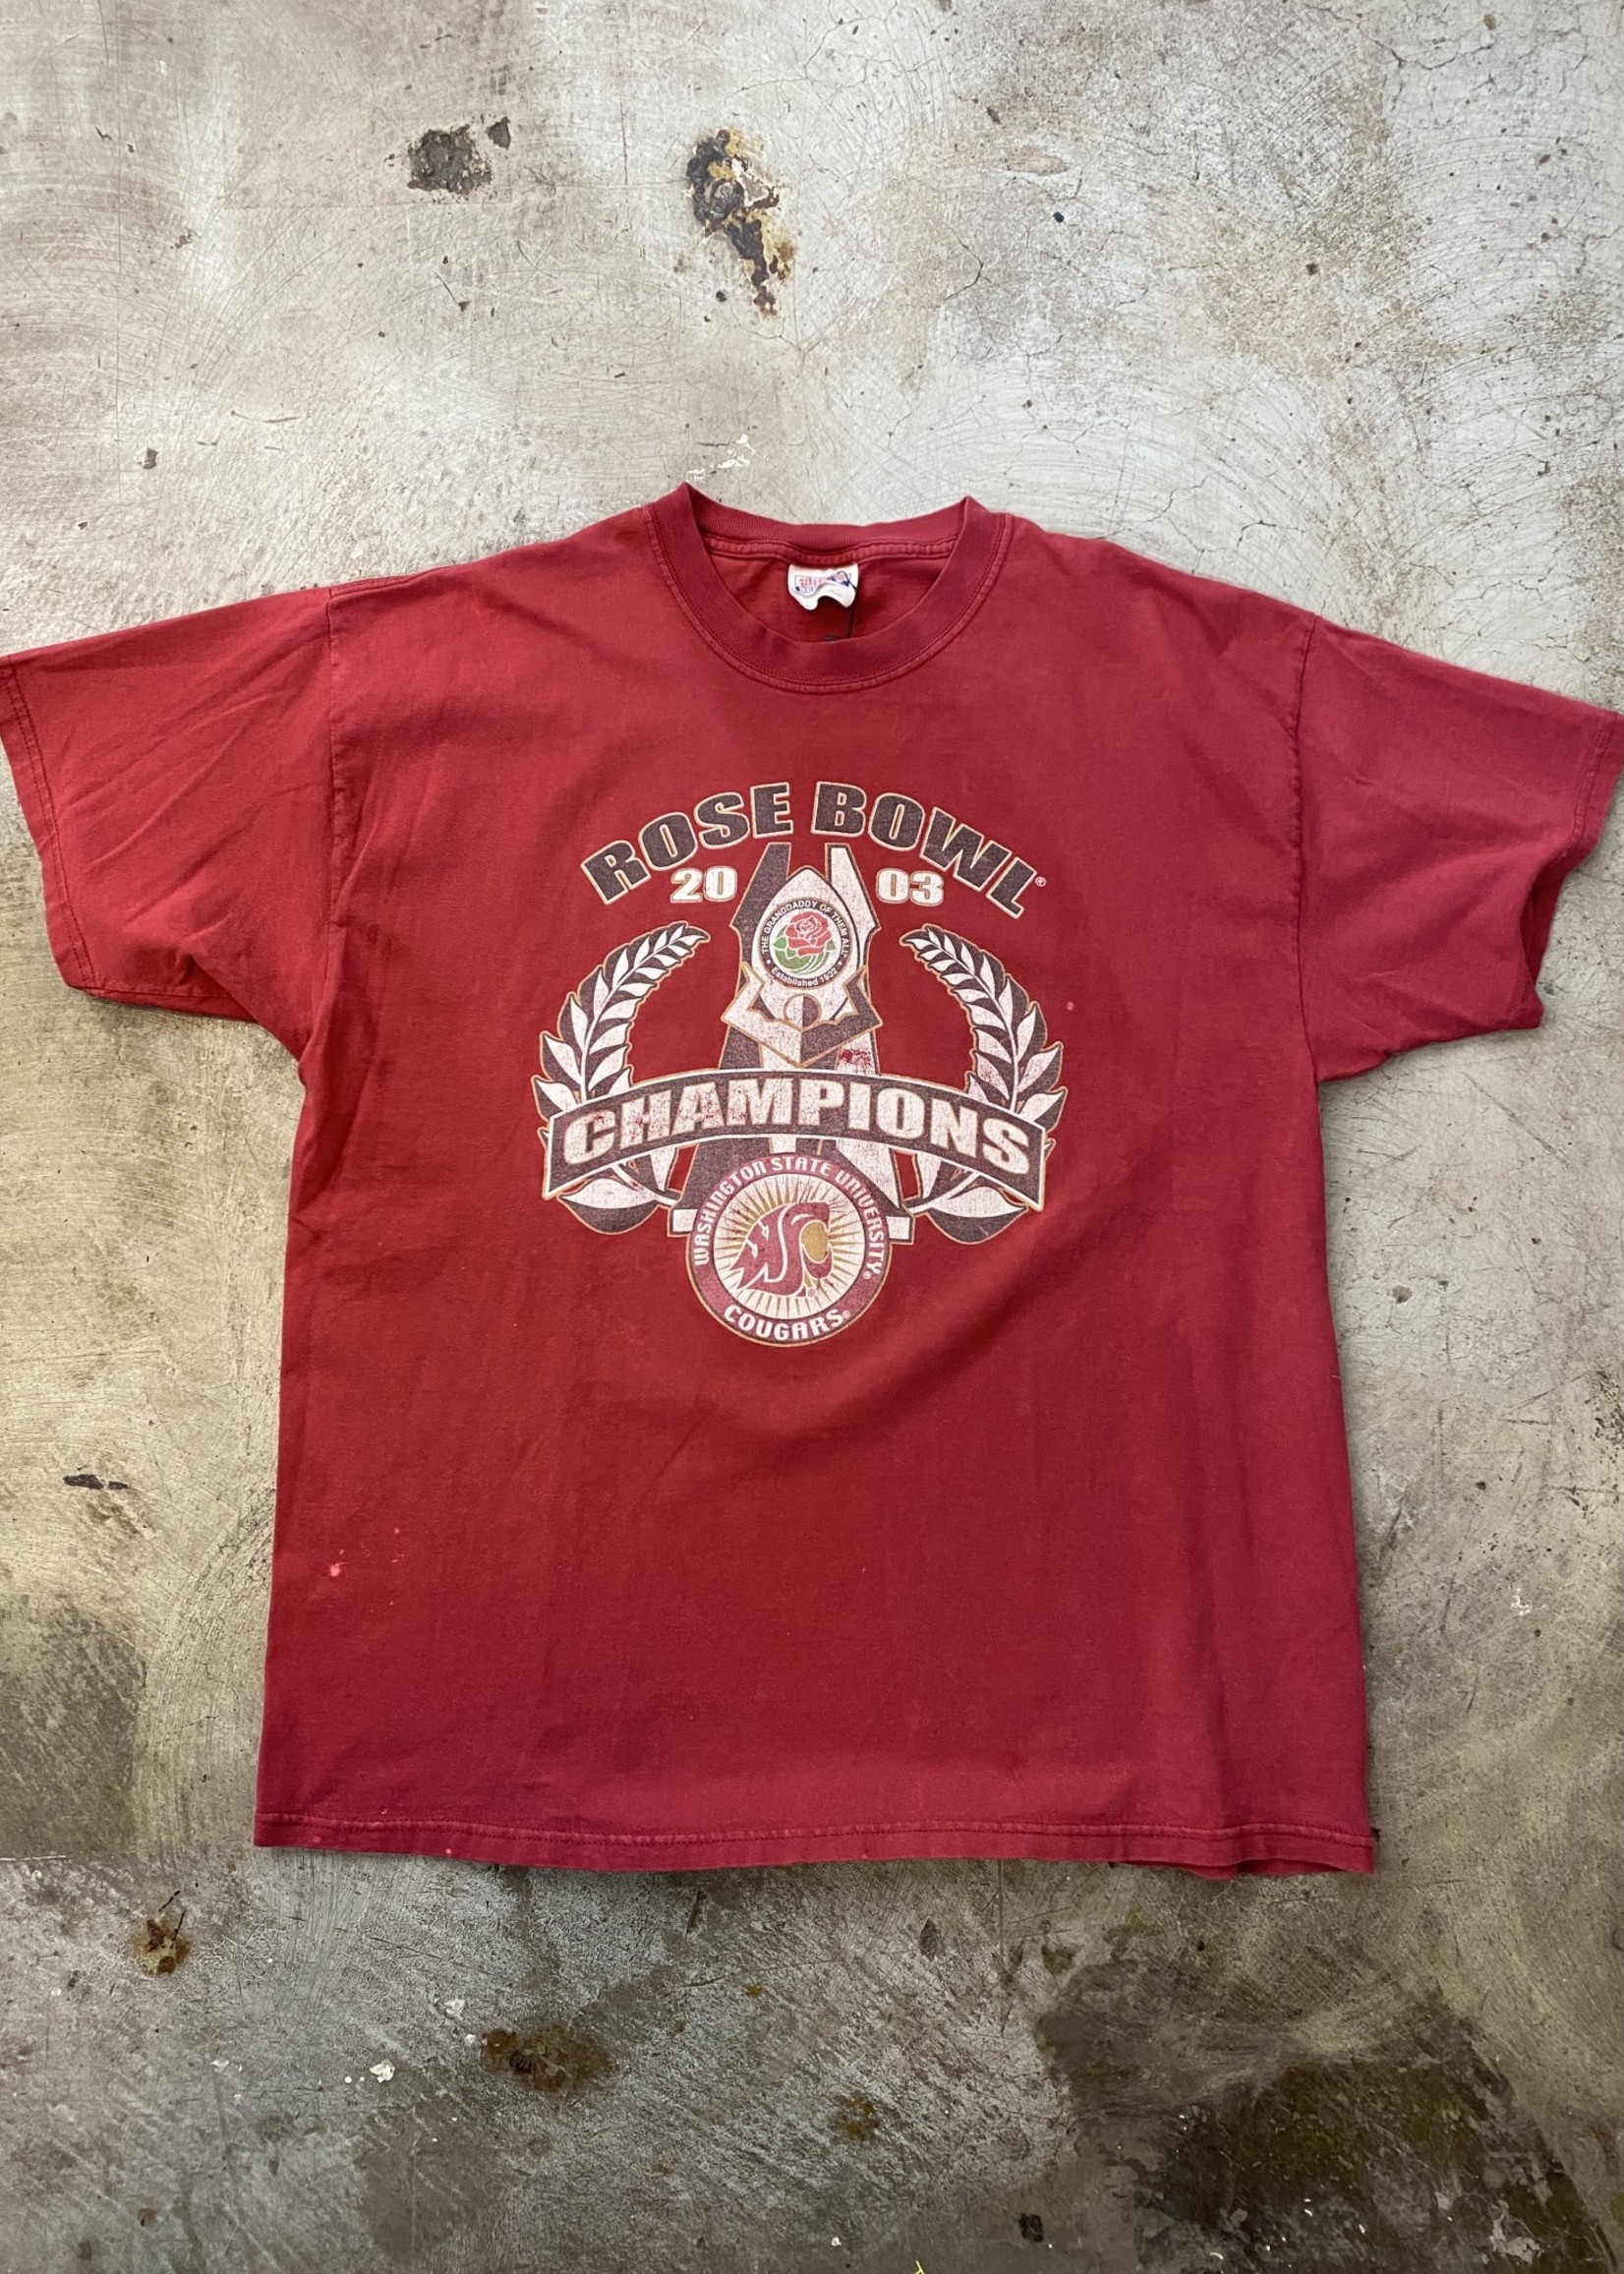 Rose Bowl Champions '03 Red Tee XL